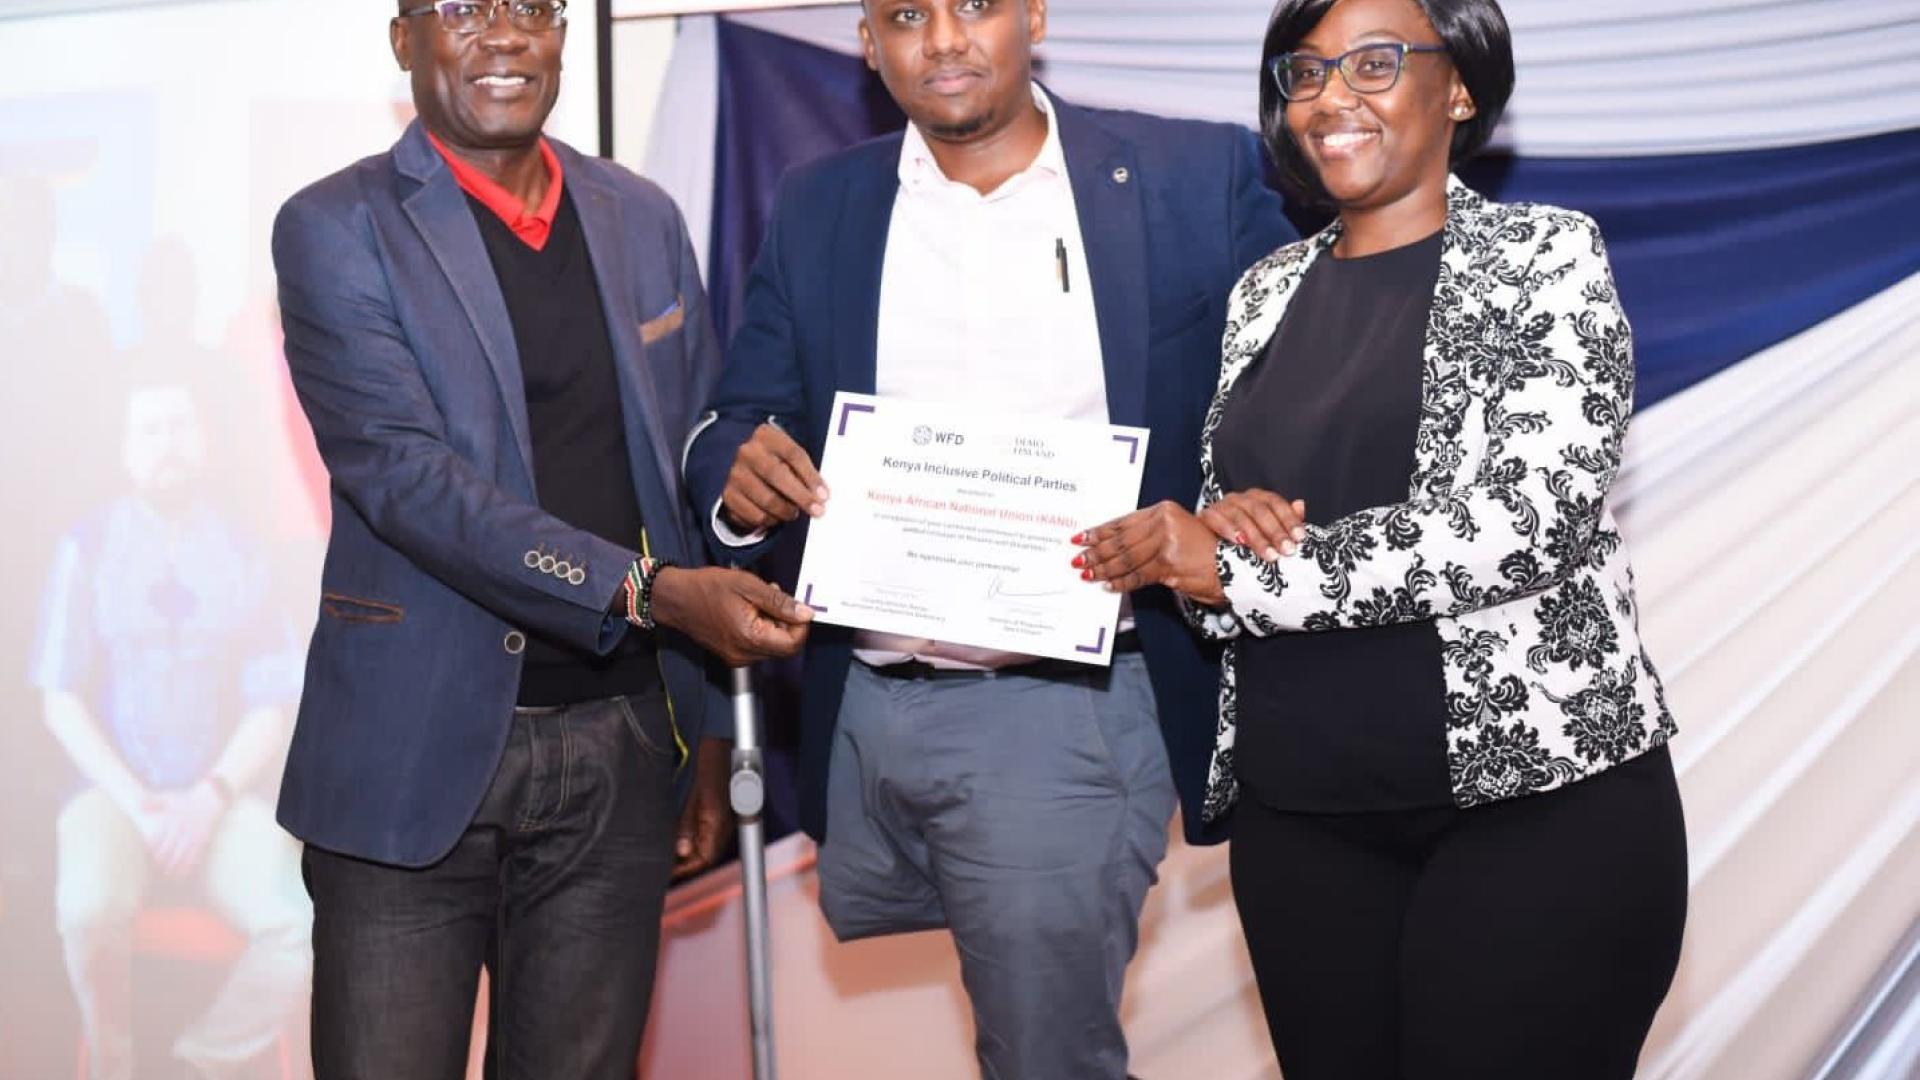 Kenya Office country director, Mrs. Maureen Oduori (right), awarding the Kenya African National Union (KANU) political party officials a certificate in recognition of their continued commitment to strengthening the political inclusion of persons with disabilities during the Kenya Inclusive Political Parties award ceremony in Kenya on December 6.